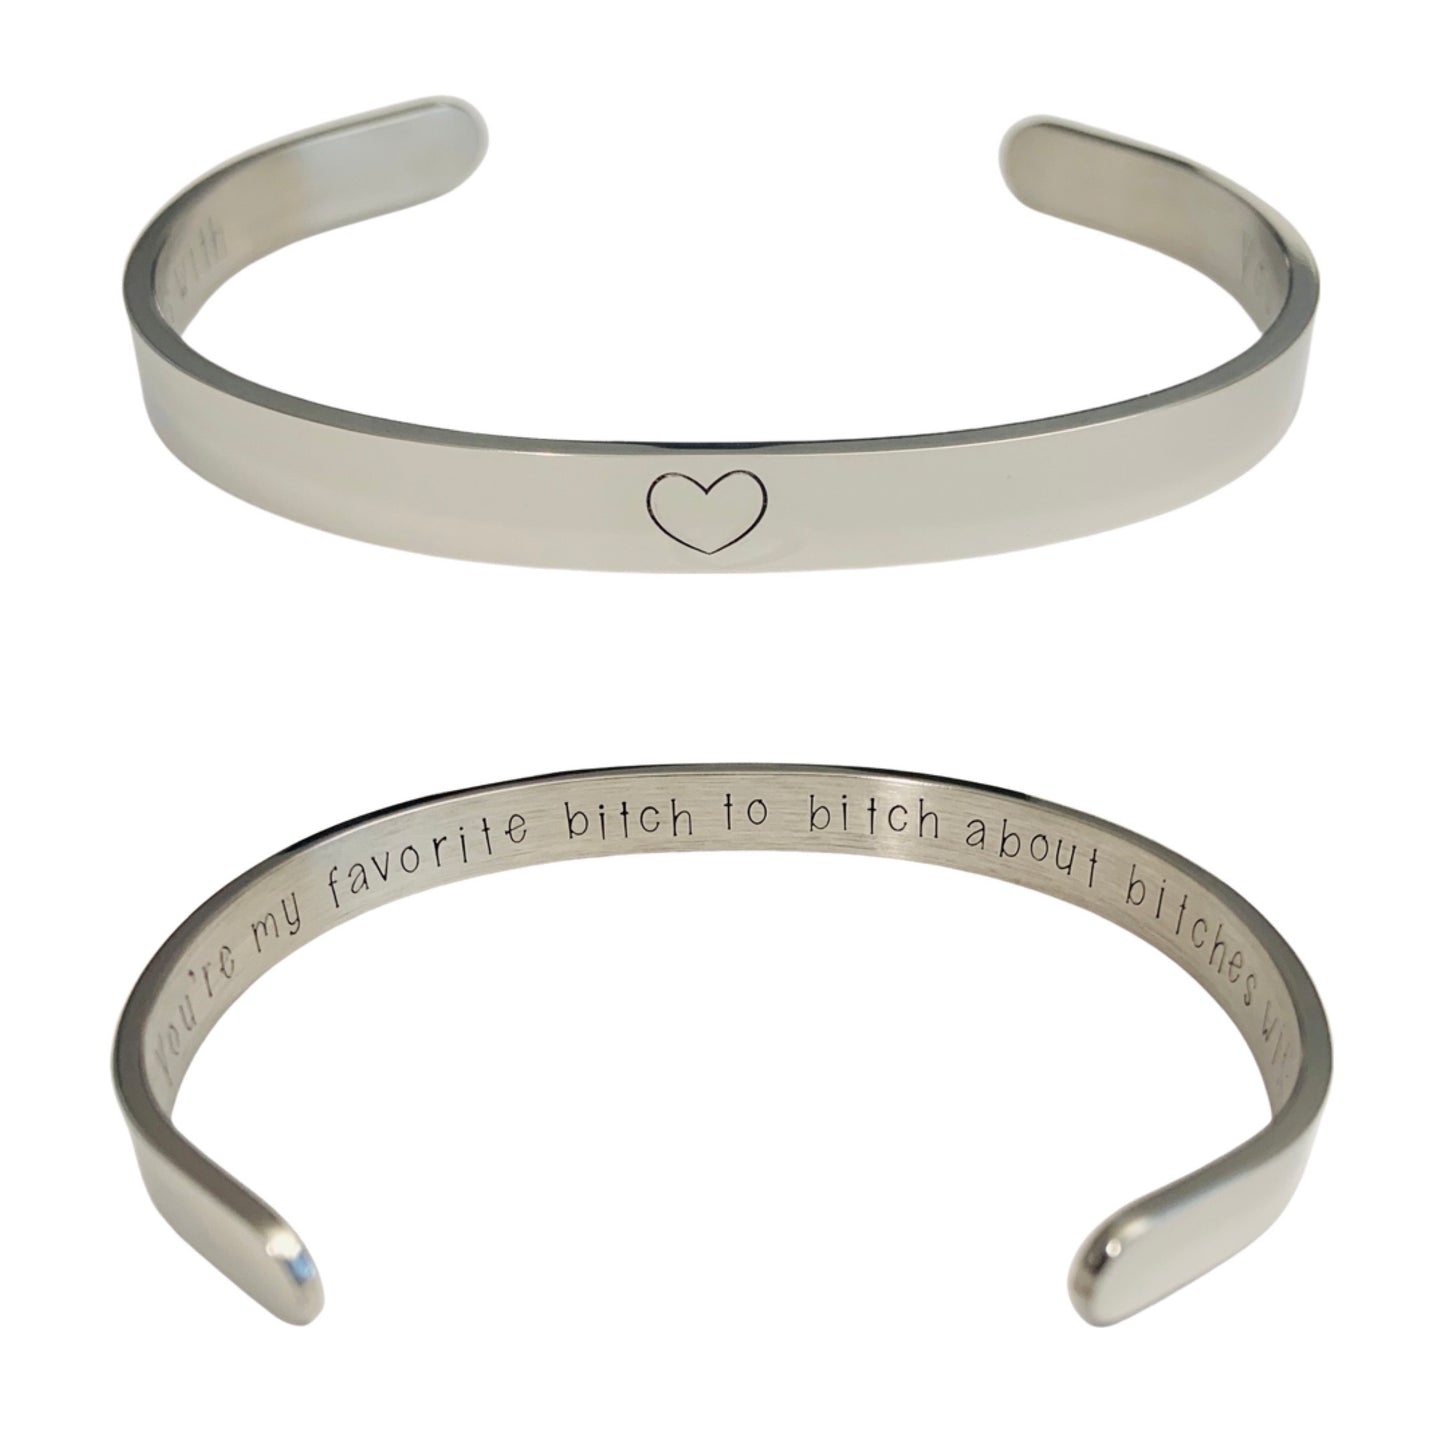 You’re my favorite b*tch to b*tch about b*tches with - Cuff Bracelet